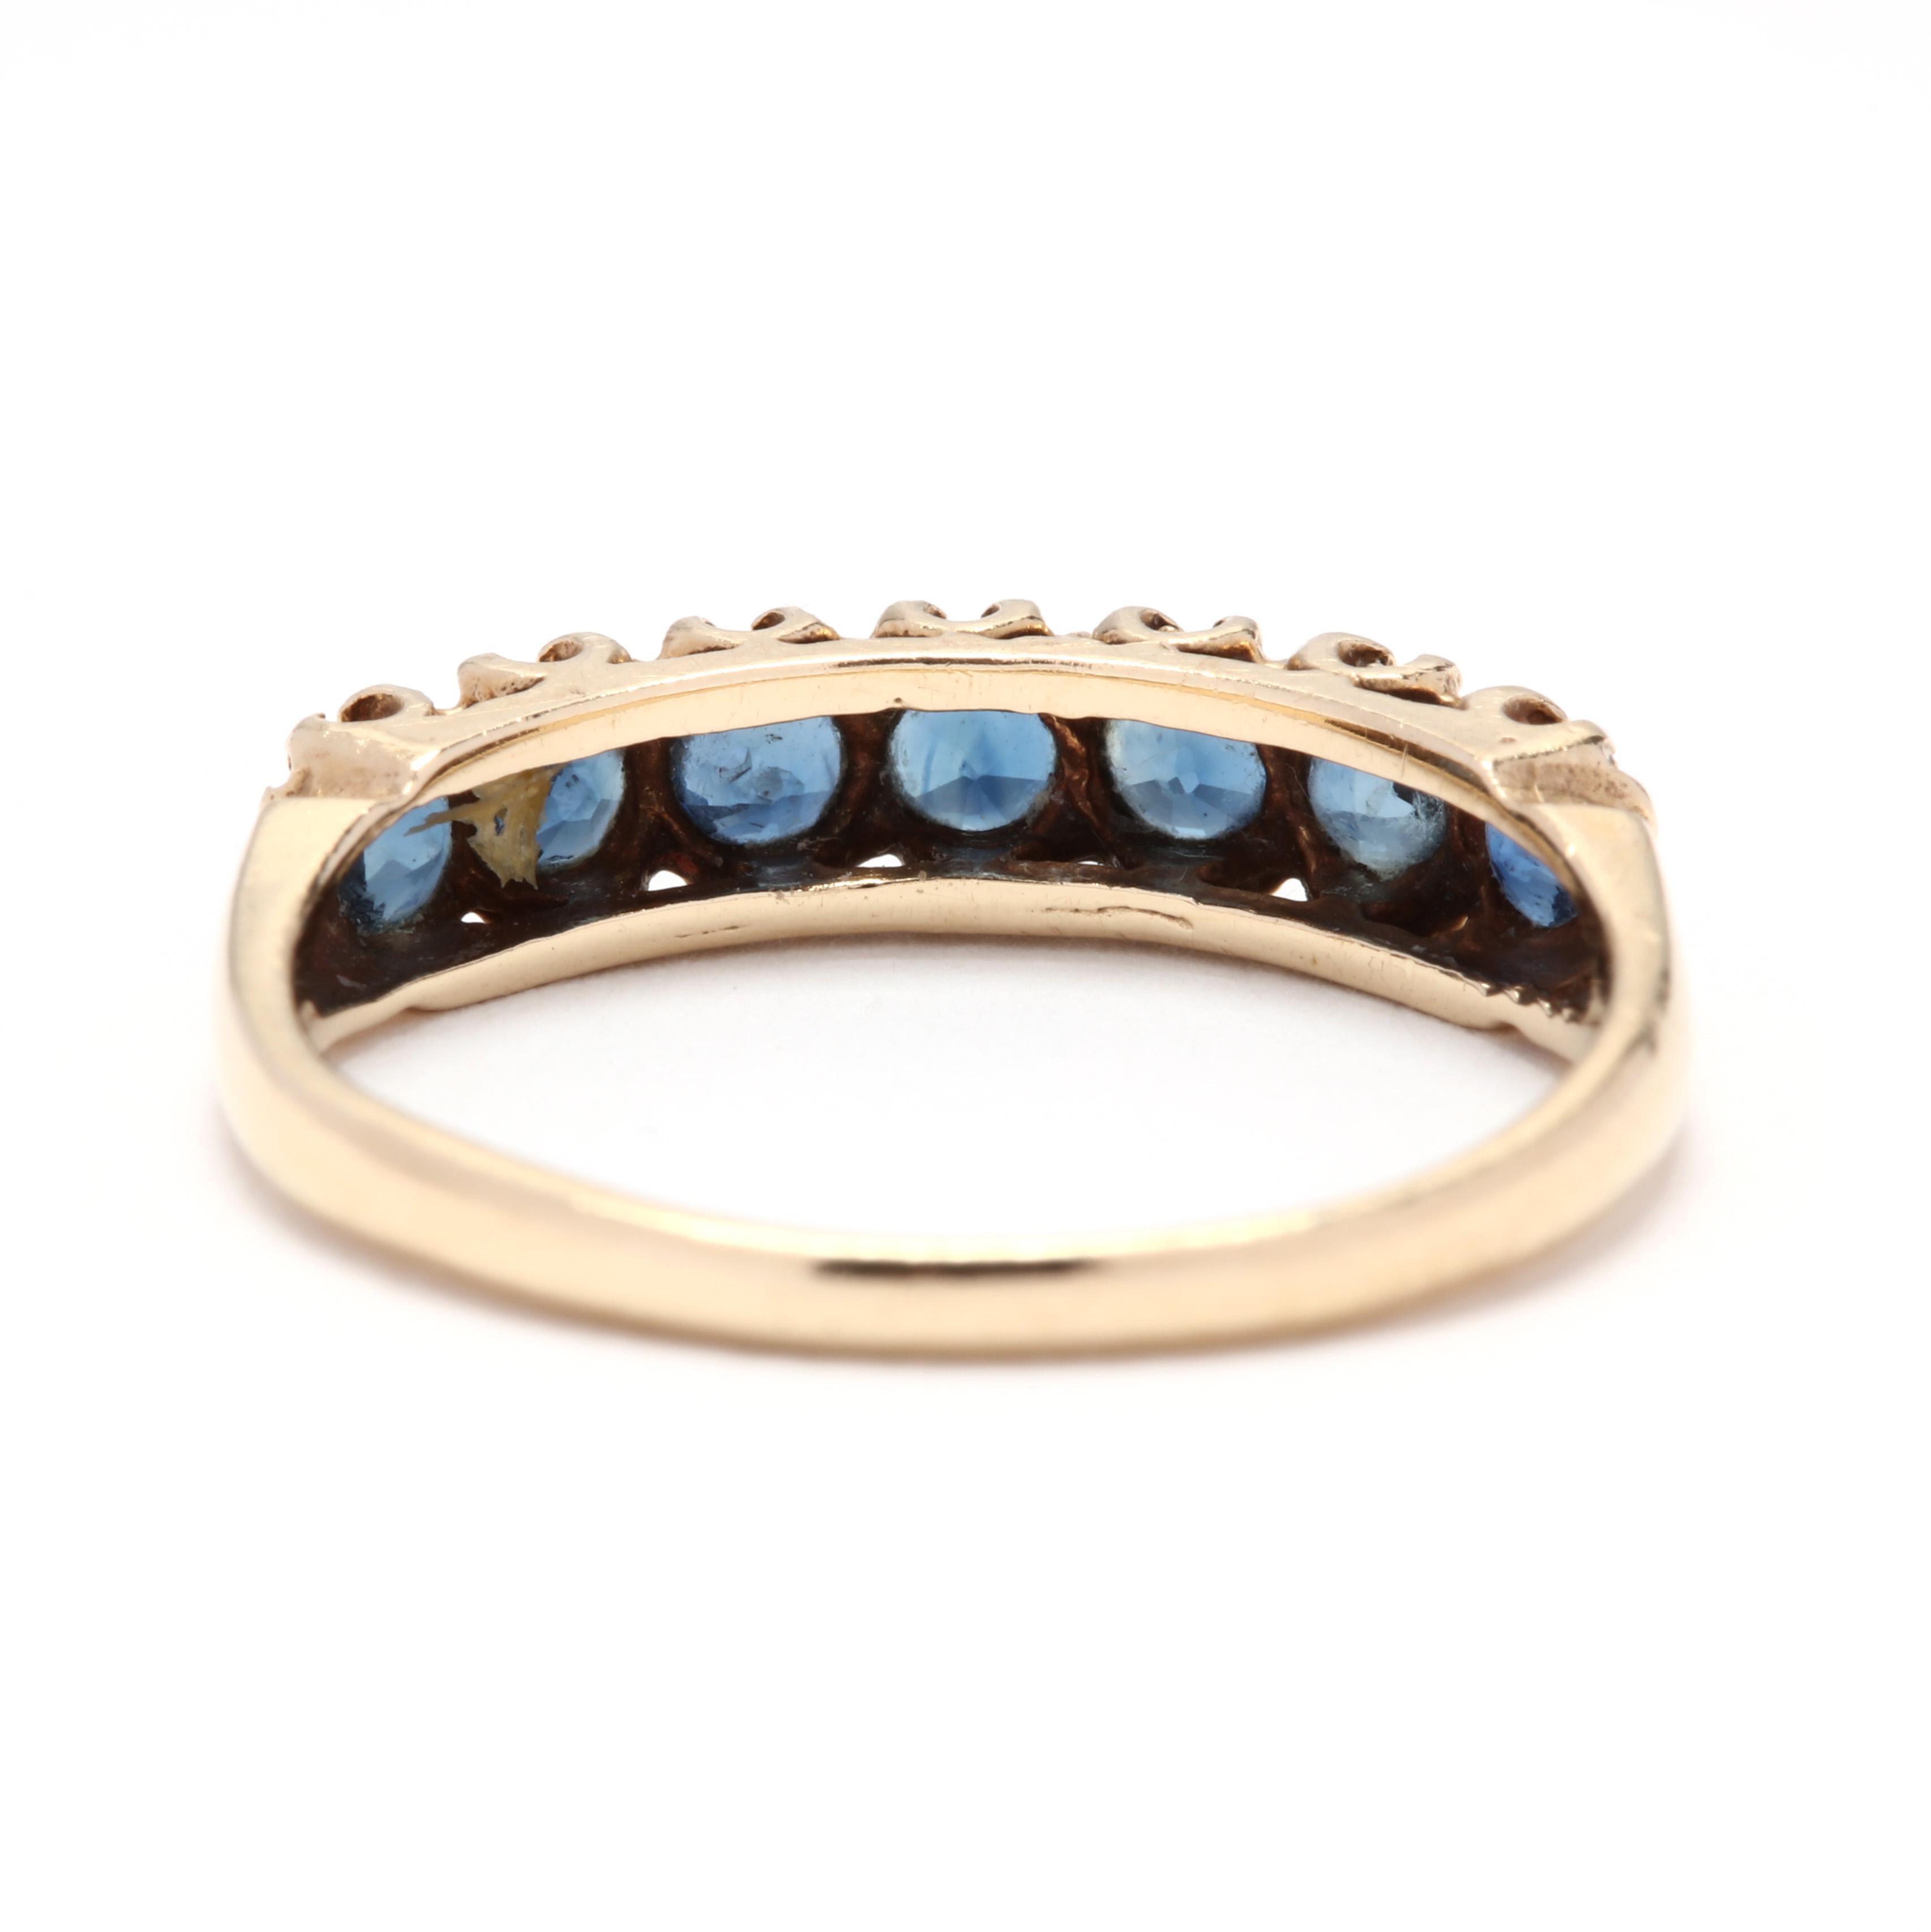 Retro Vintage 14 Karat Yellow Gold and Sapphire Stackable Band Ring